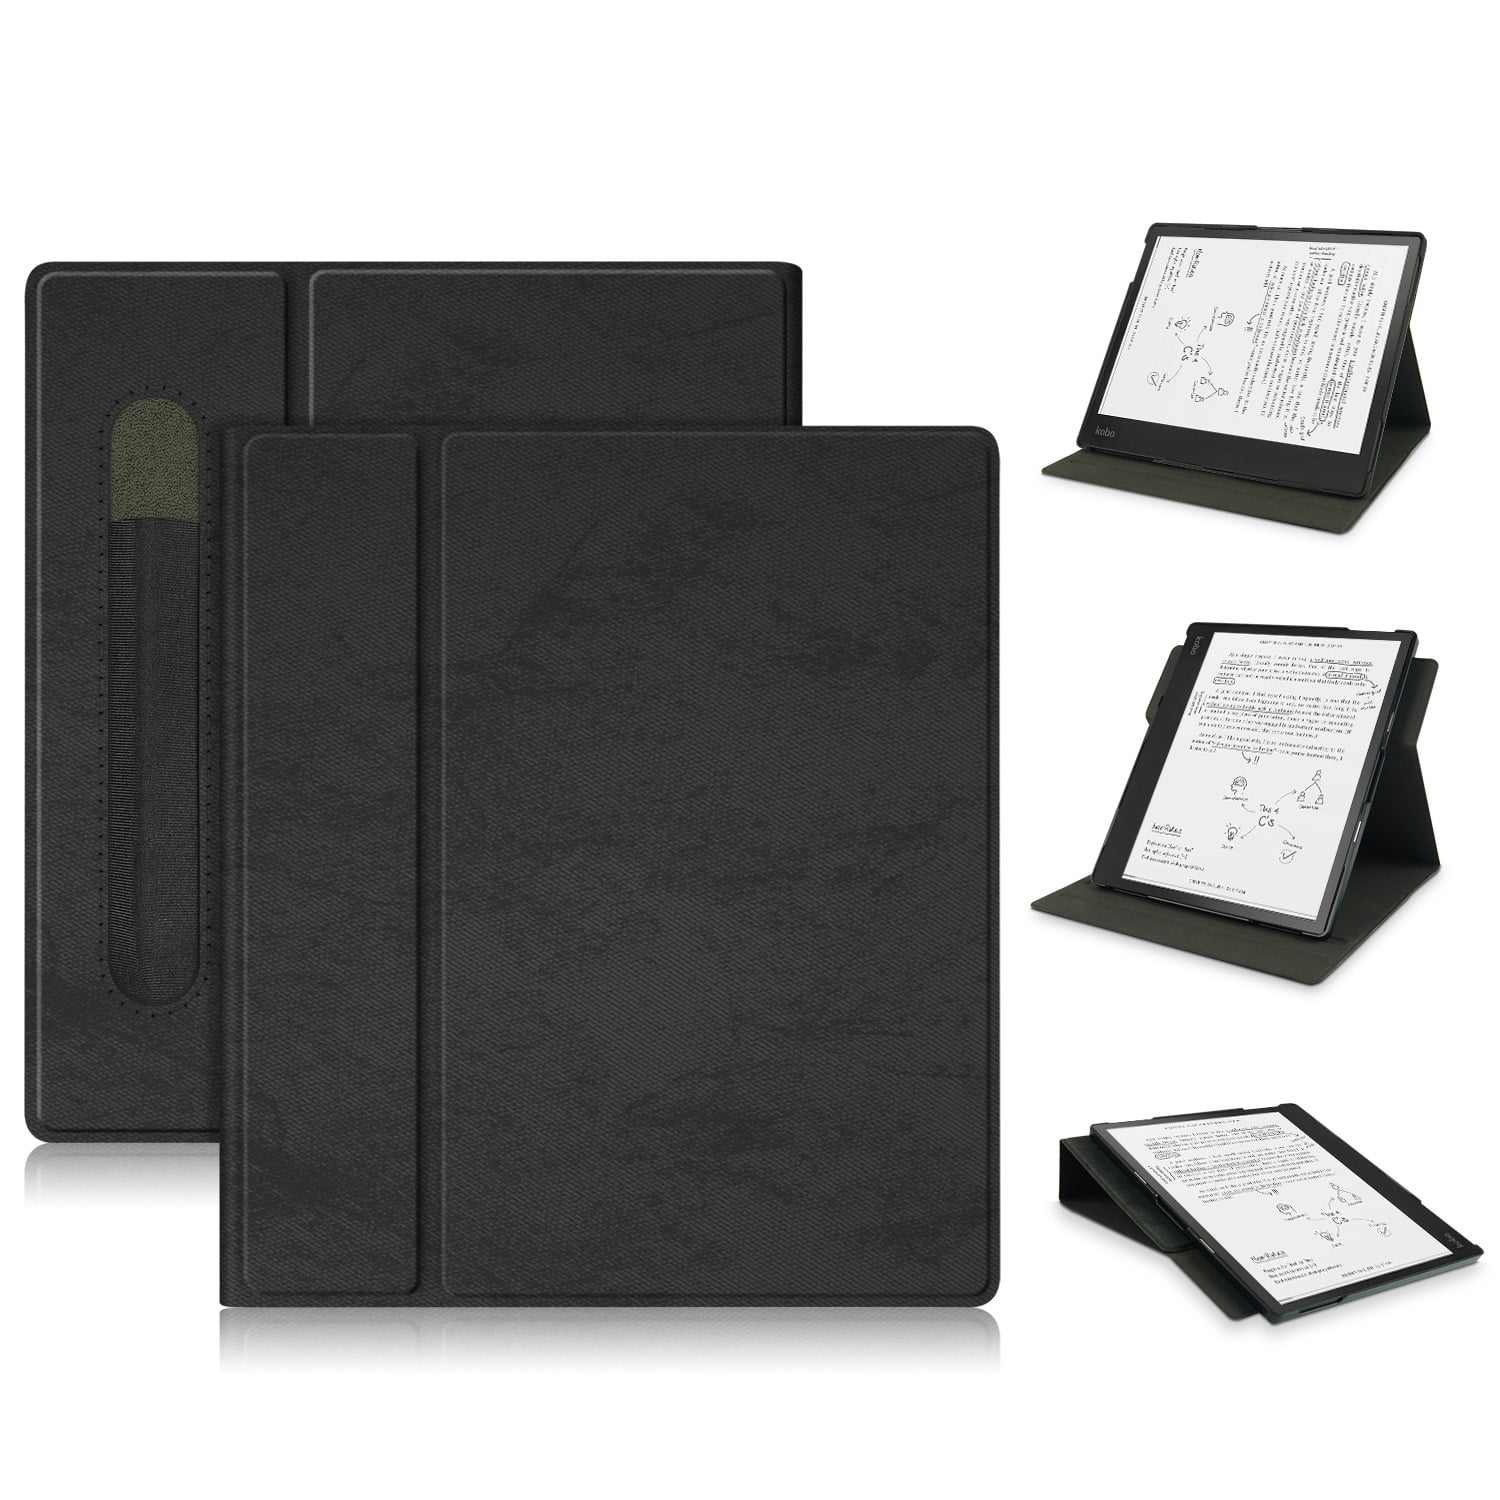 verbinding verbroken buitenste evenaar TOP SHE Case for 2021 Kobo Elipsa eReader (10.3 Inch) - Slim Fit  Lightweight Synthetic Leather Trifold Stand Case Classic Simple Cover with  Stylus Pen Holder (Black) - Walmart.com